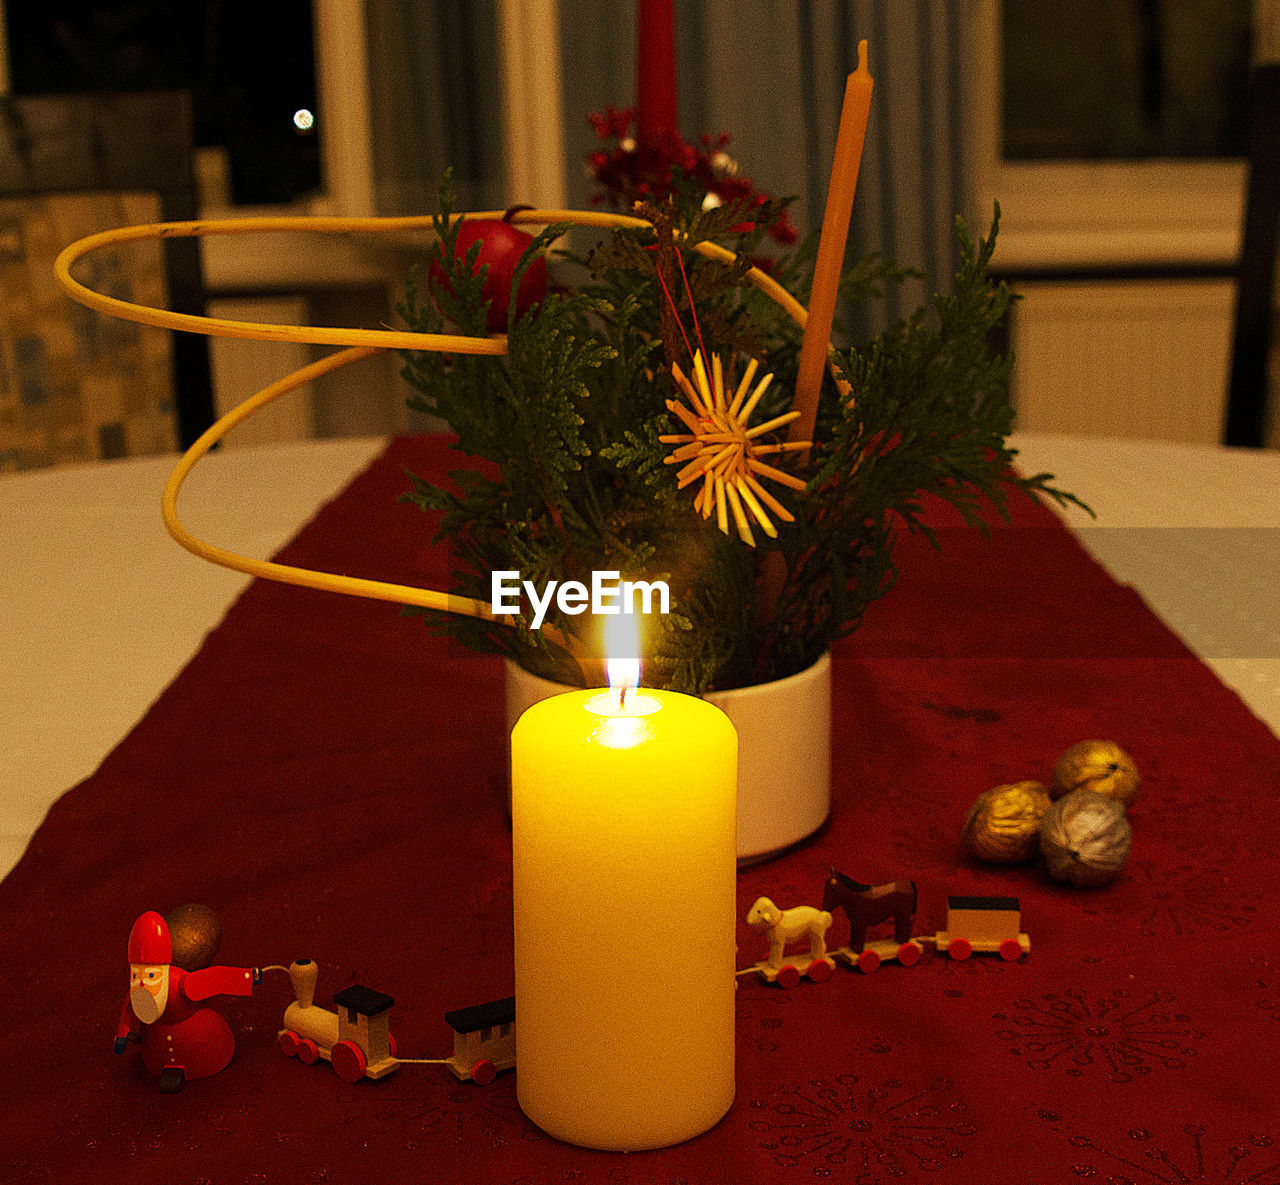 candle, burning, fire, flame, christmas, holiday, decoration, celebration, nature, yellow, illuminated, christmas decoration, lighting, indoors, interior design, heat, no people, centrepiece, religion, tradition, table, candle holder, plant, flower, spirituality, candlestick holder, event, belief, christmas ornament, glowing, red, wreath, christmas tree